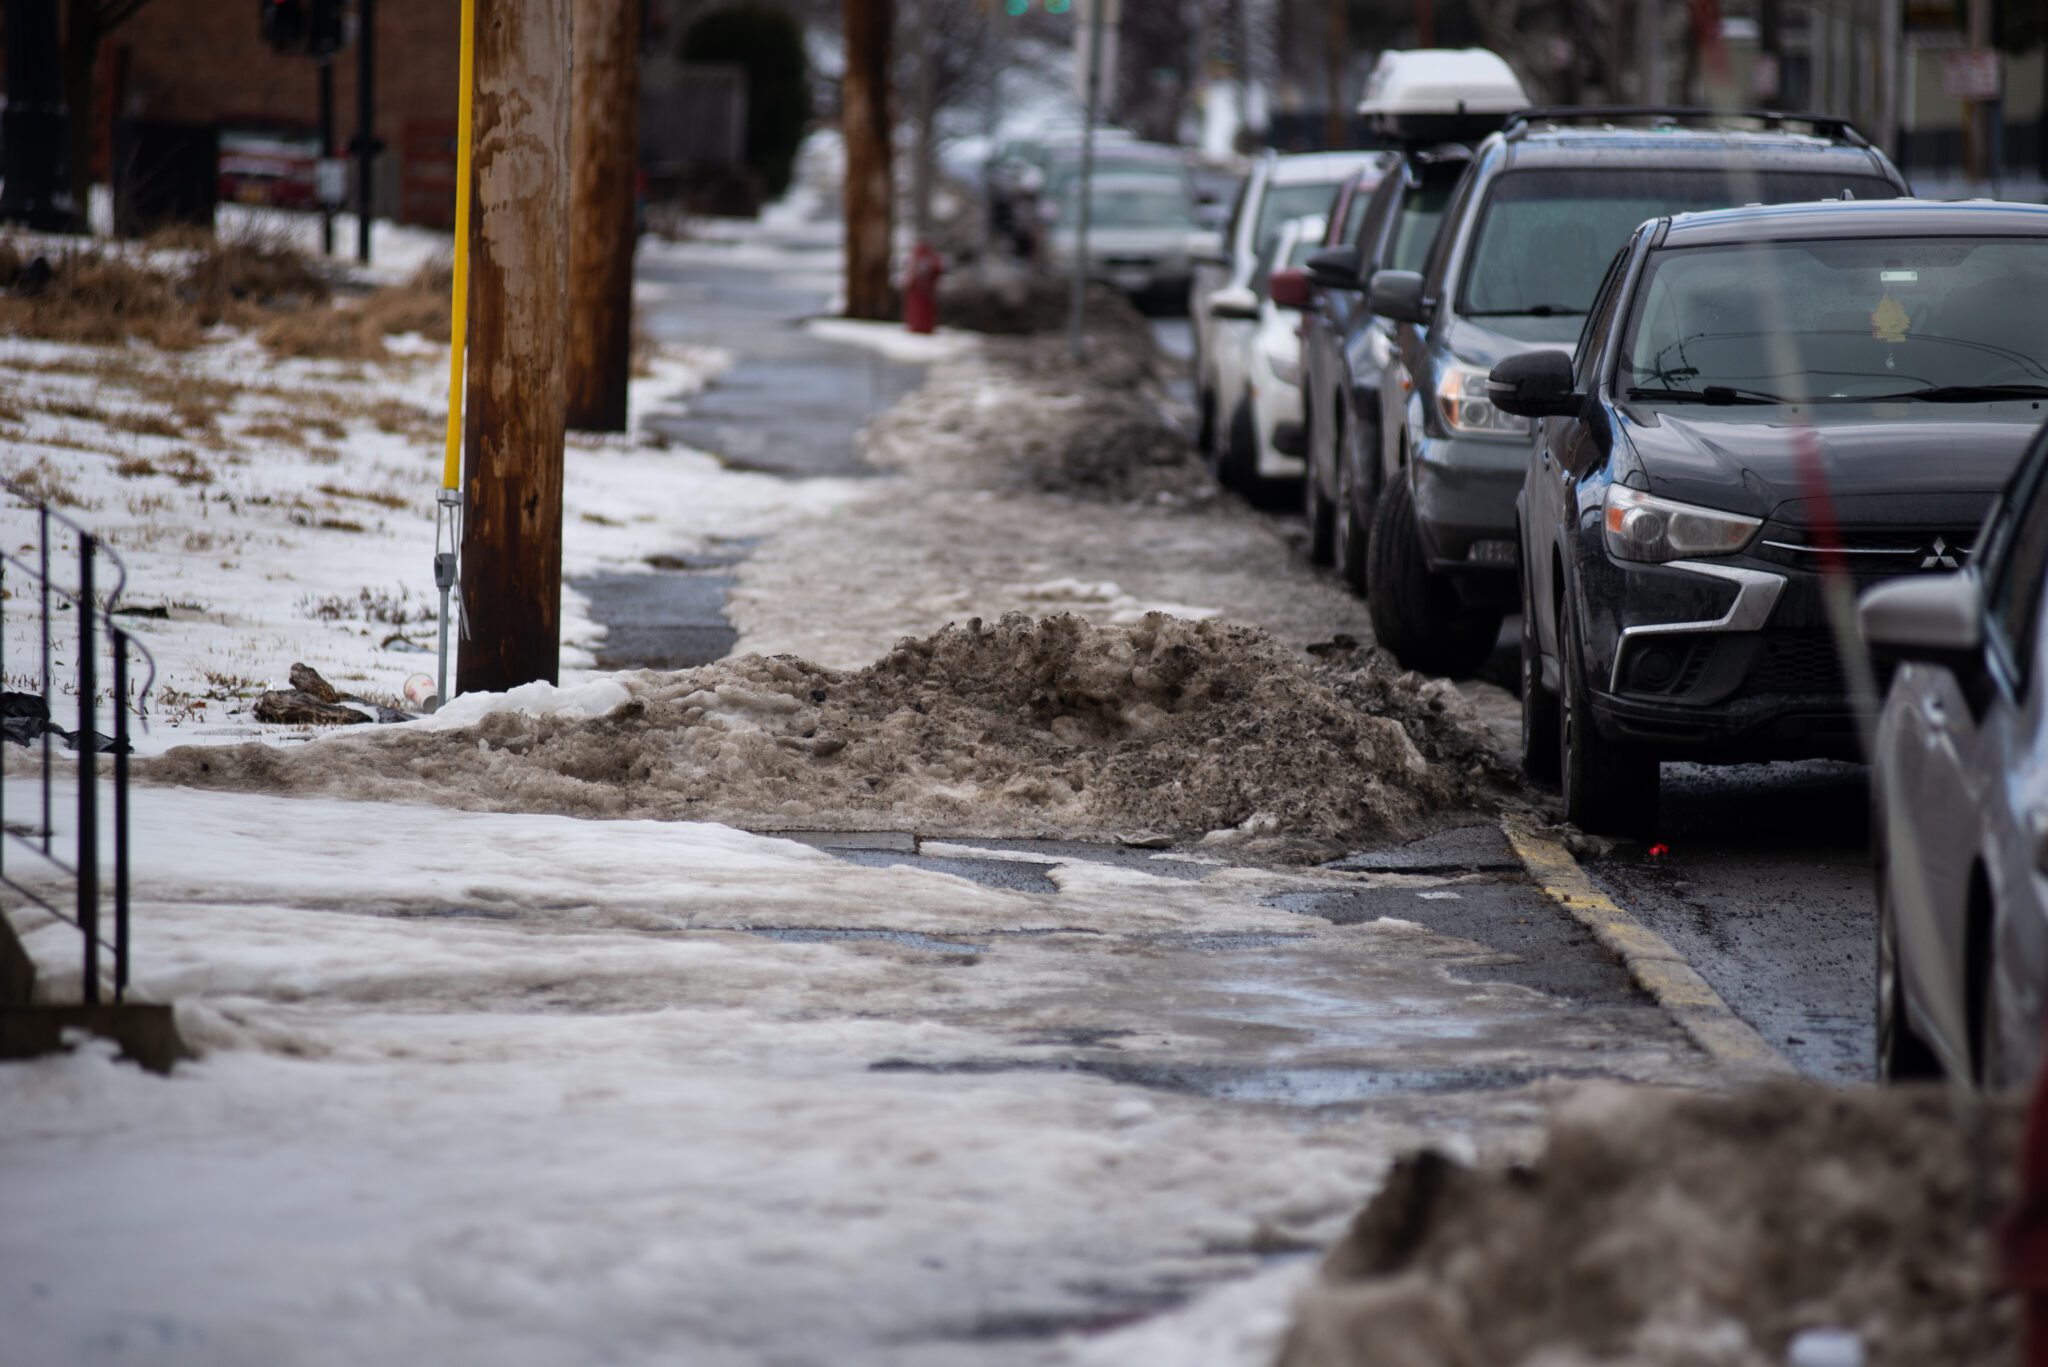 After snow storms, Albany pedestrians feel left out in the cold